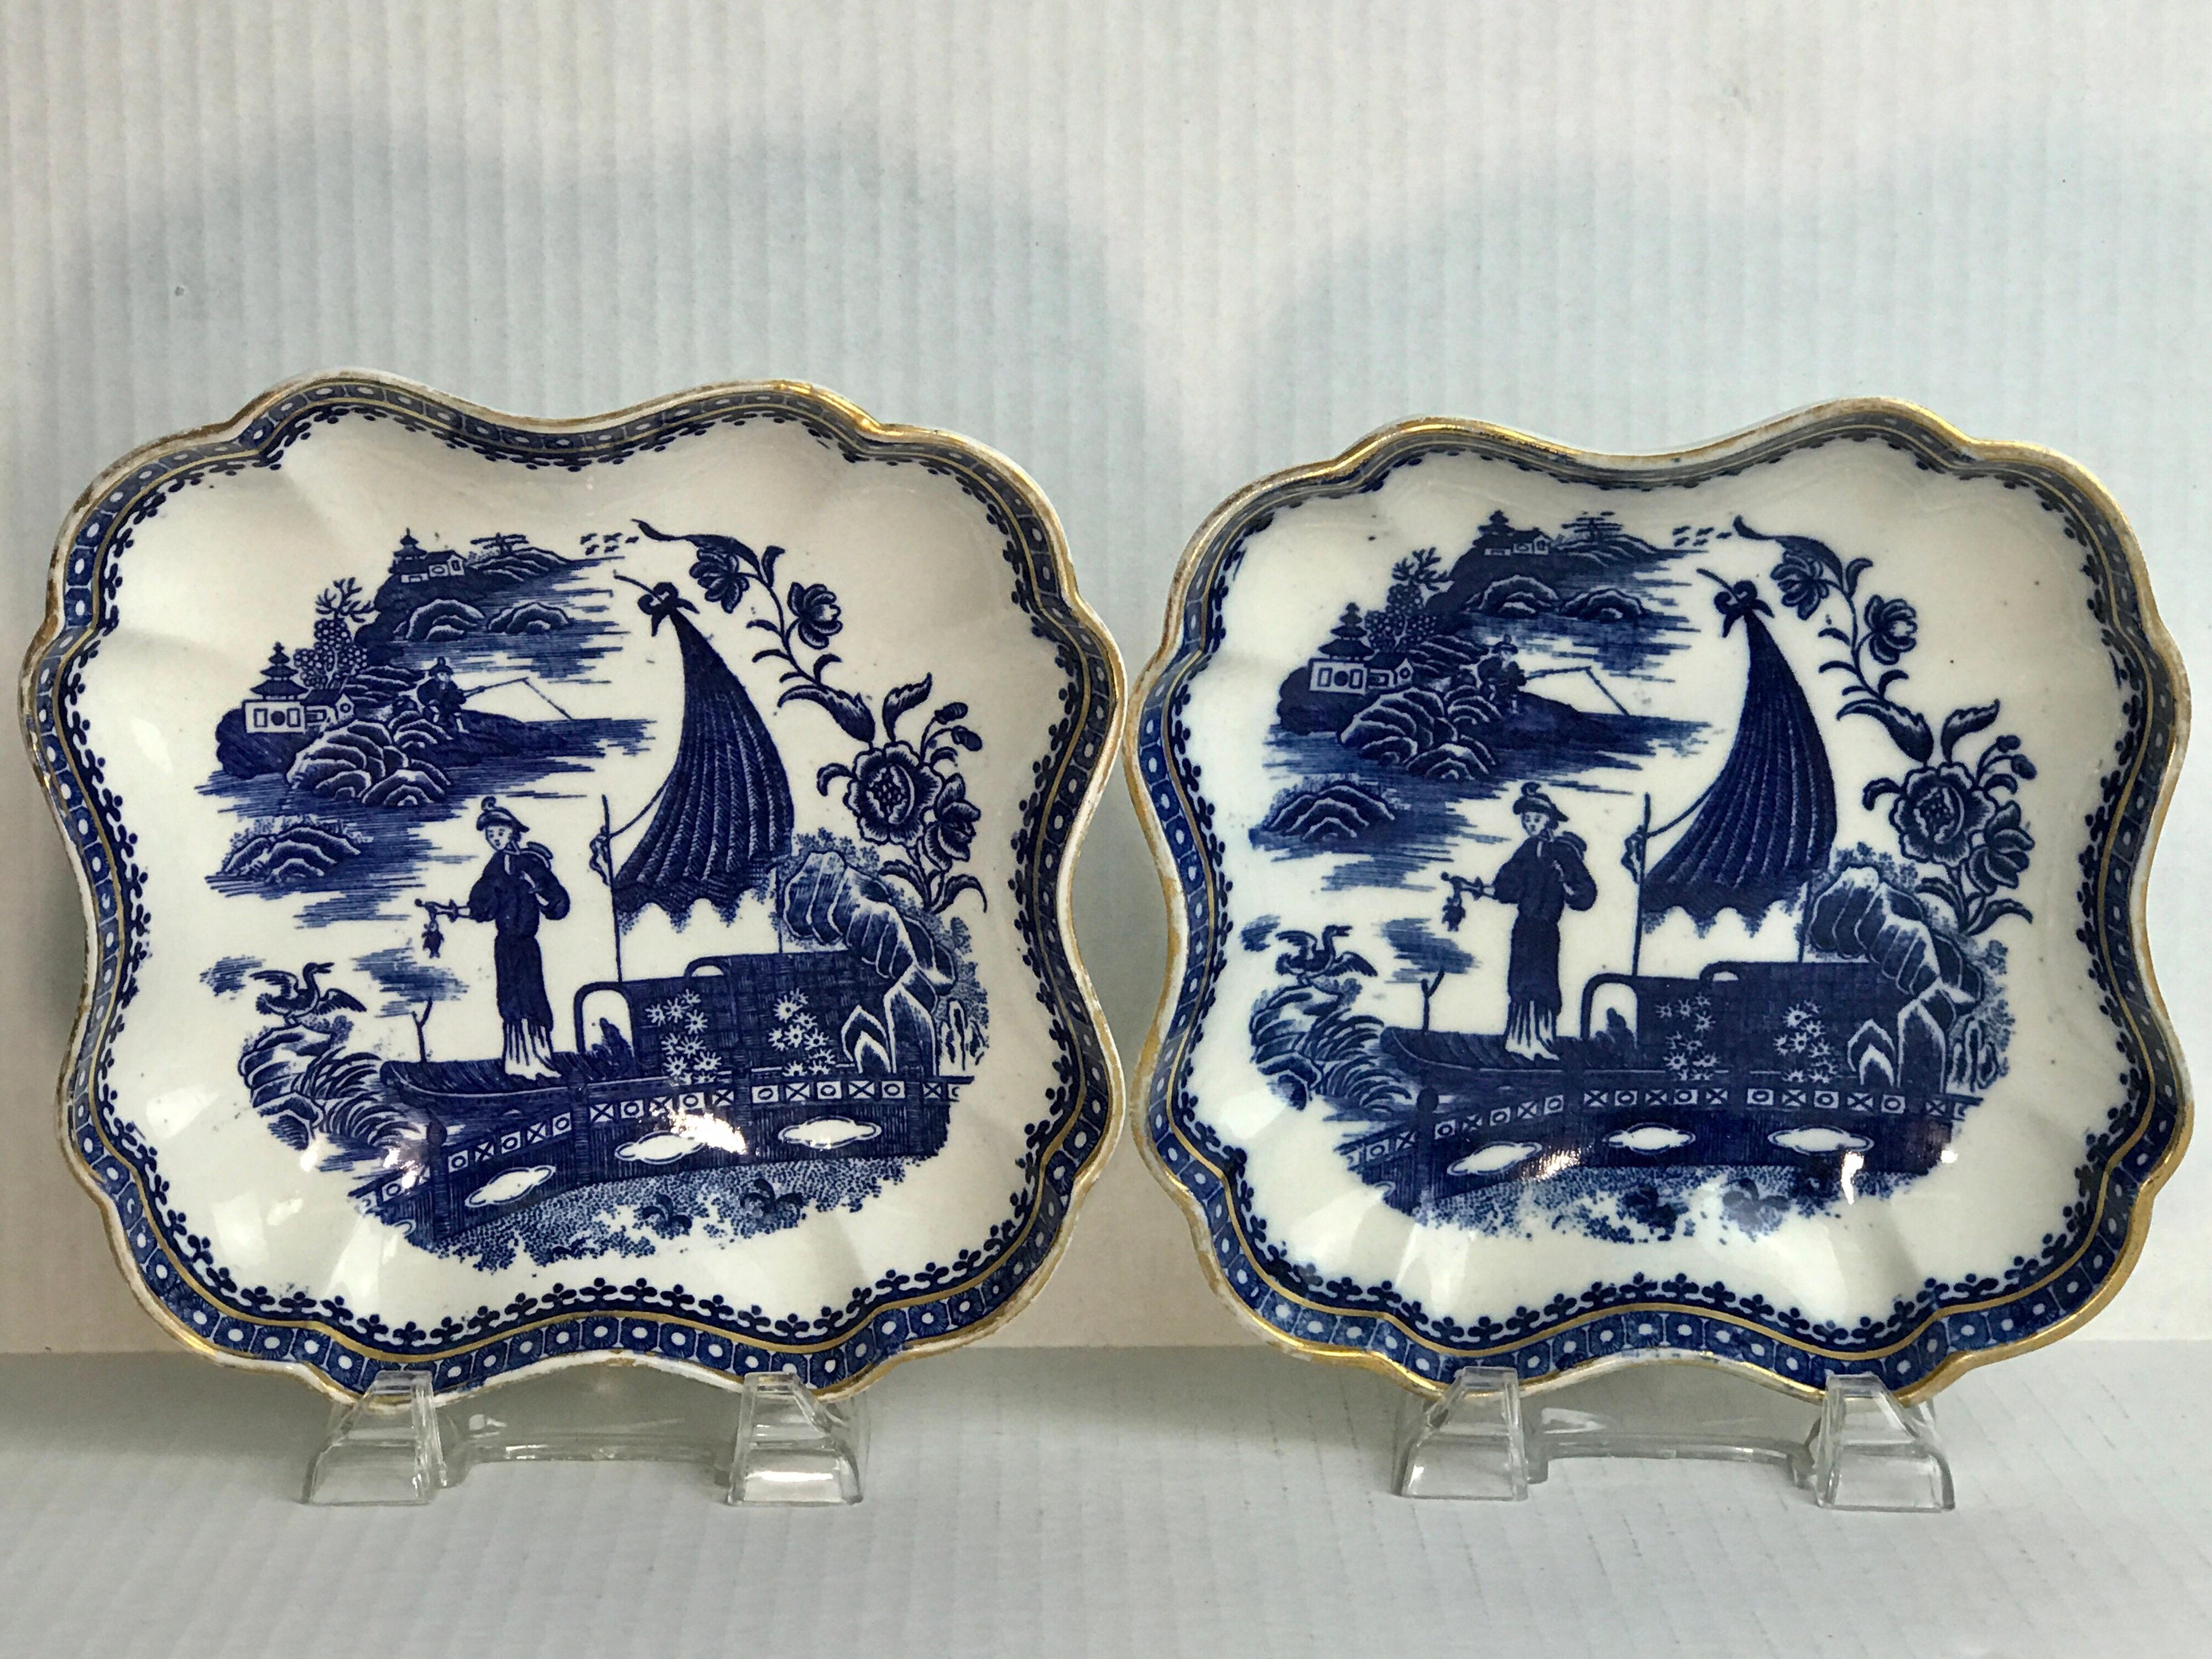 Pair of Antique English Blue and White Chinoiserie Square Bowls by Caughley In Good Condition For Sale In West Palm Beach, FL